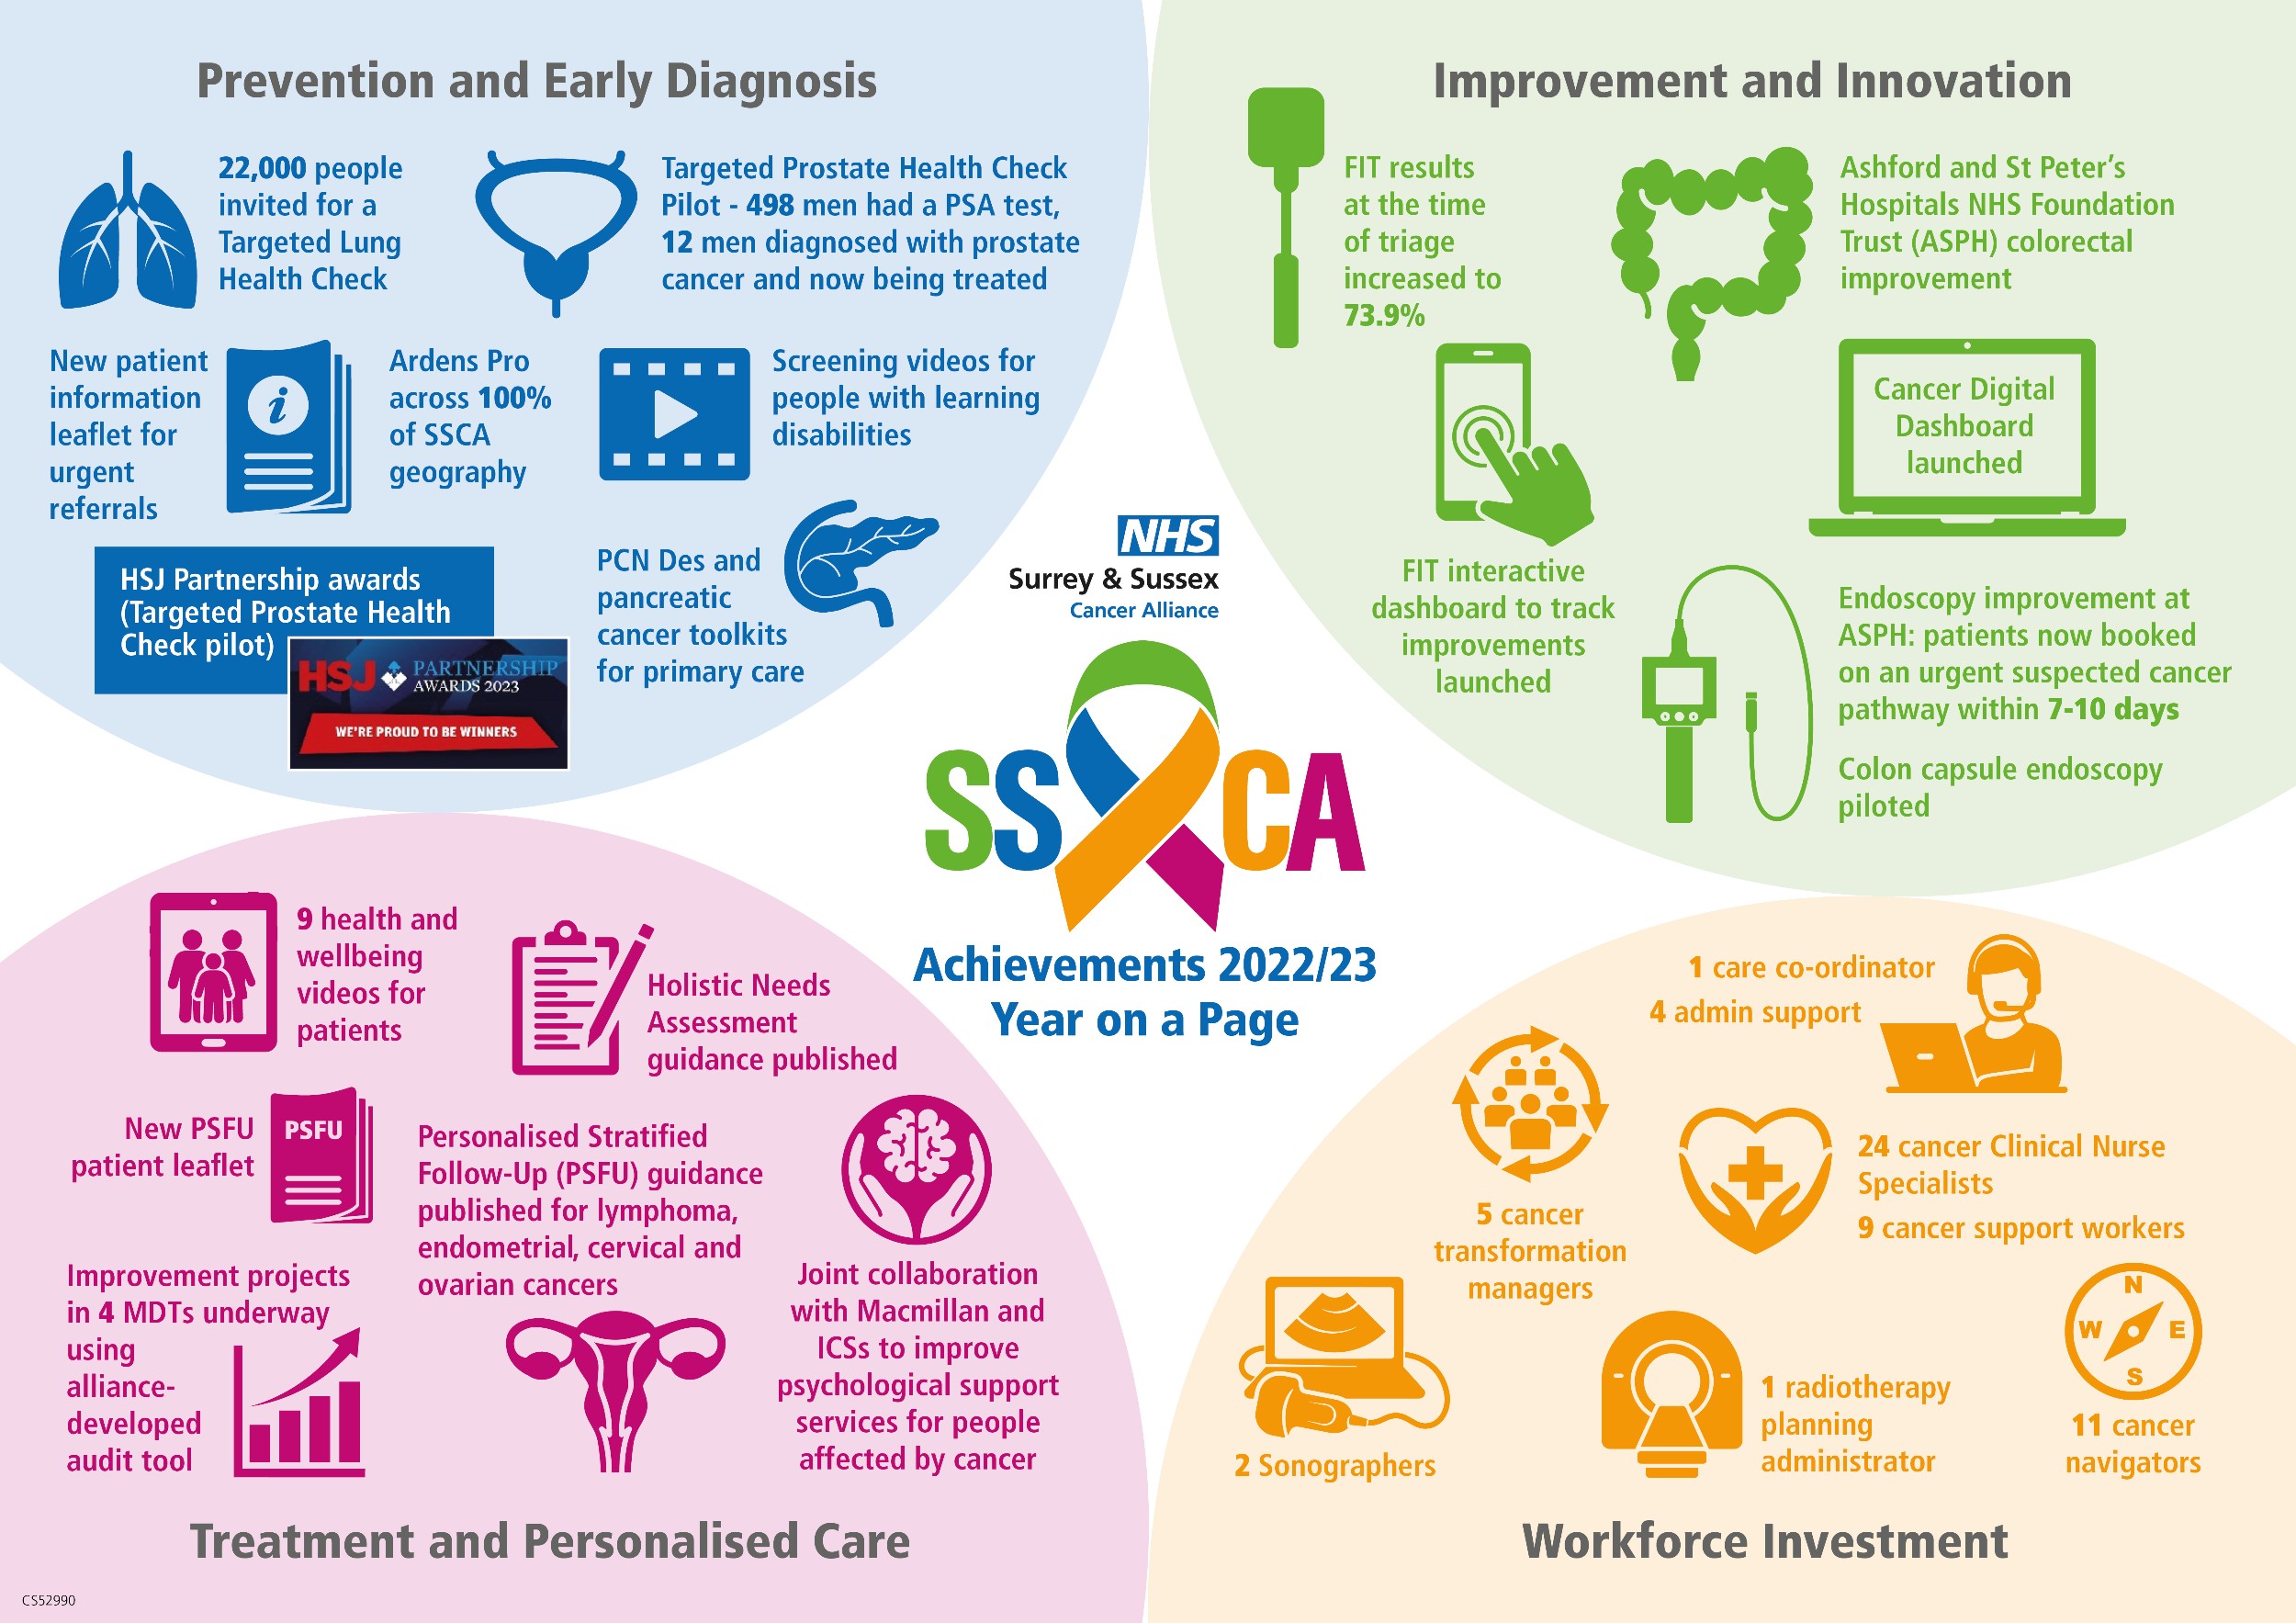  A year on a page image detailing Surrey and Sussex Cancer Alliance's highlights of 2022-2023